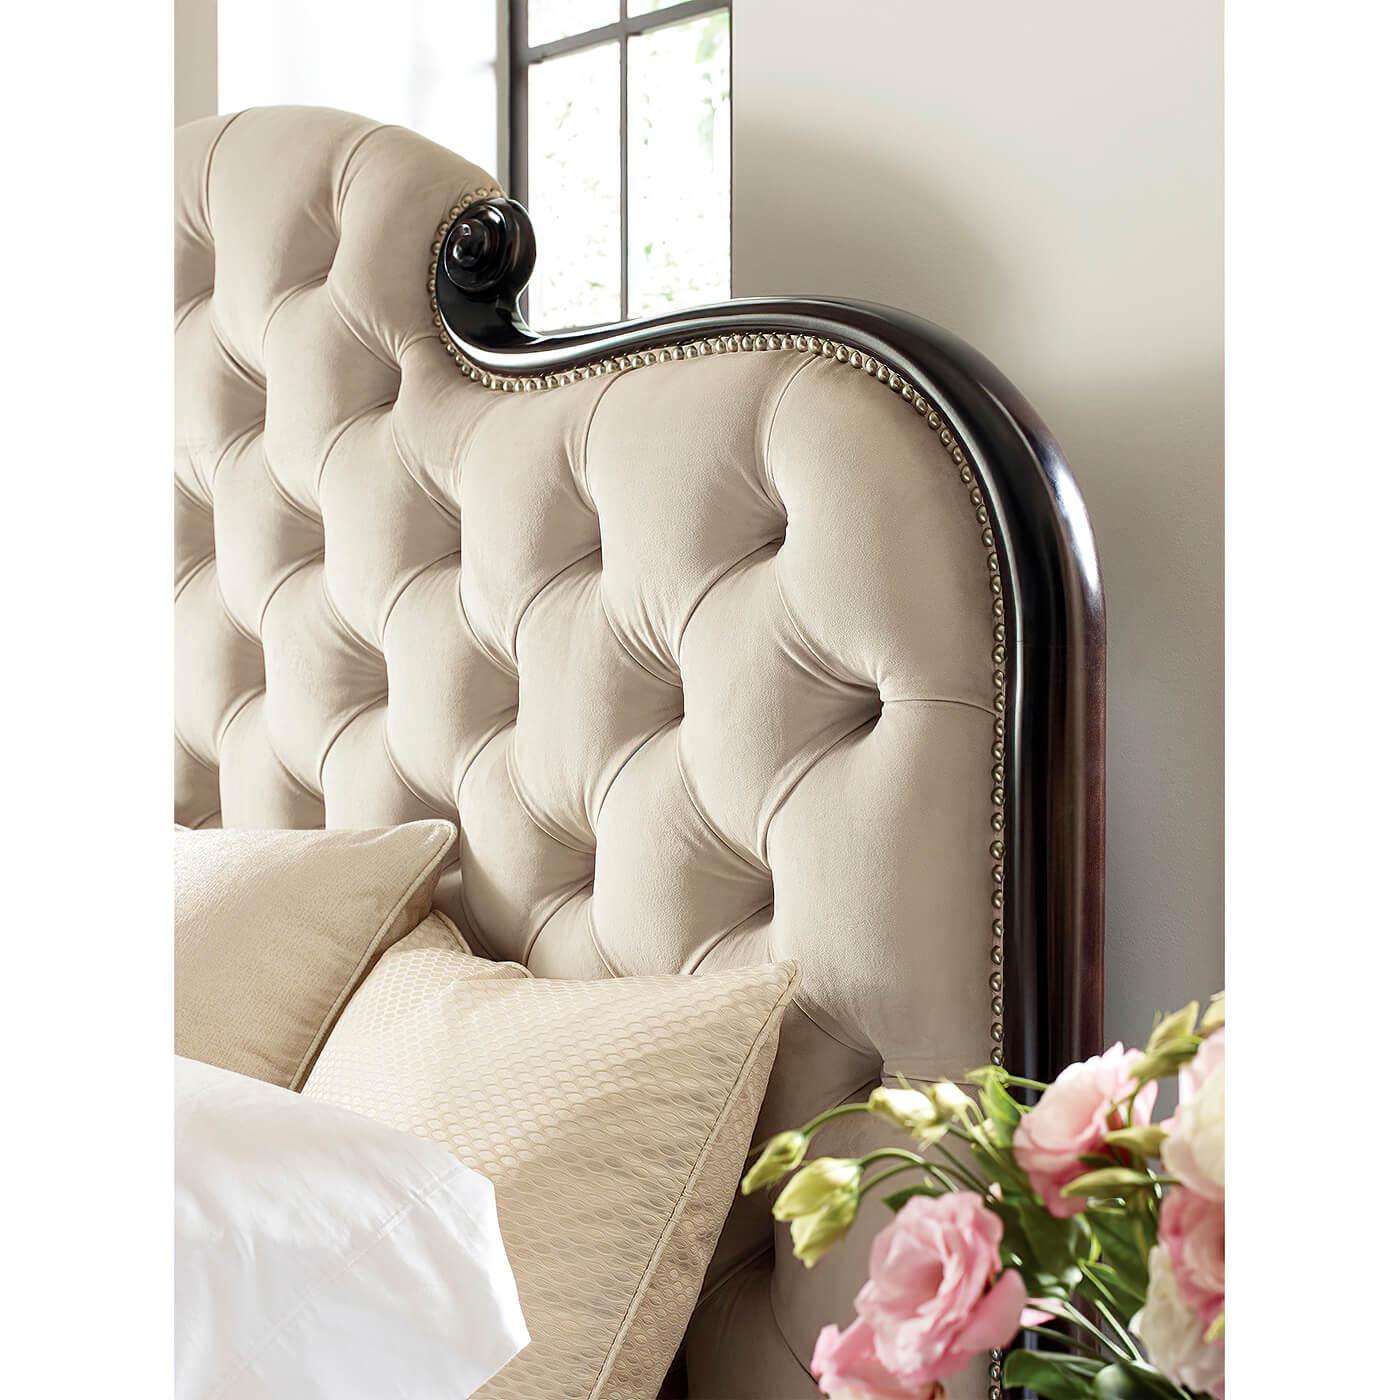 A fine English Regency style carved and upholstered queen-size bed. With carved serpentine top rails and a button-tufted and upholstered headboard and footboard. 

A beautiful blend of dark wood, intricately carved scrolls, and lush fabrics.